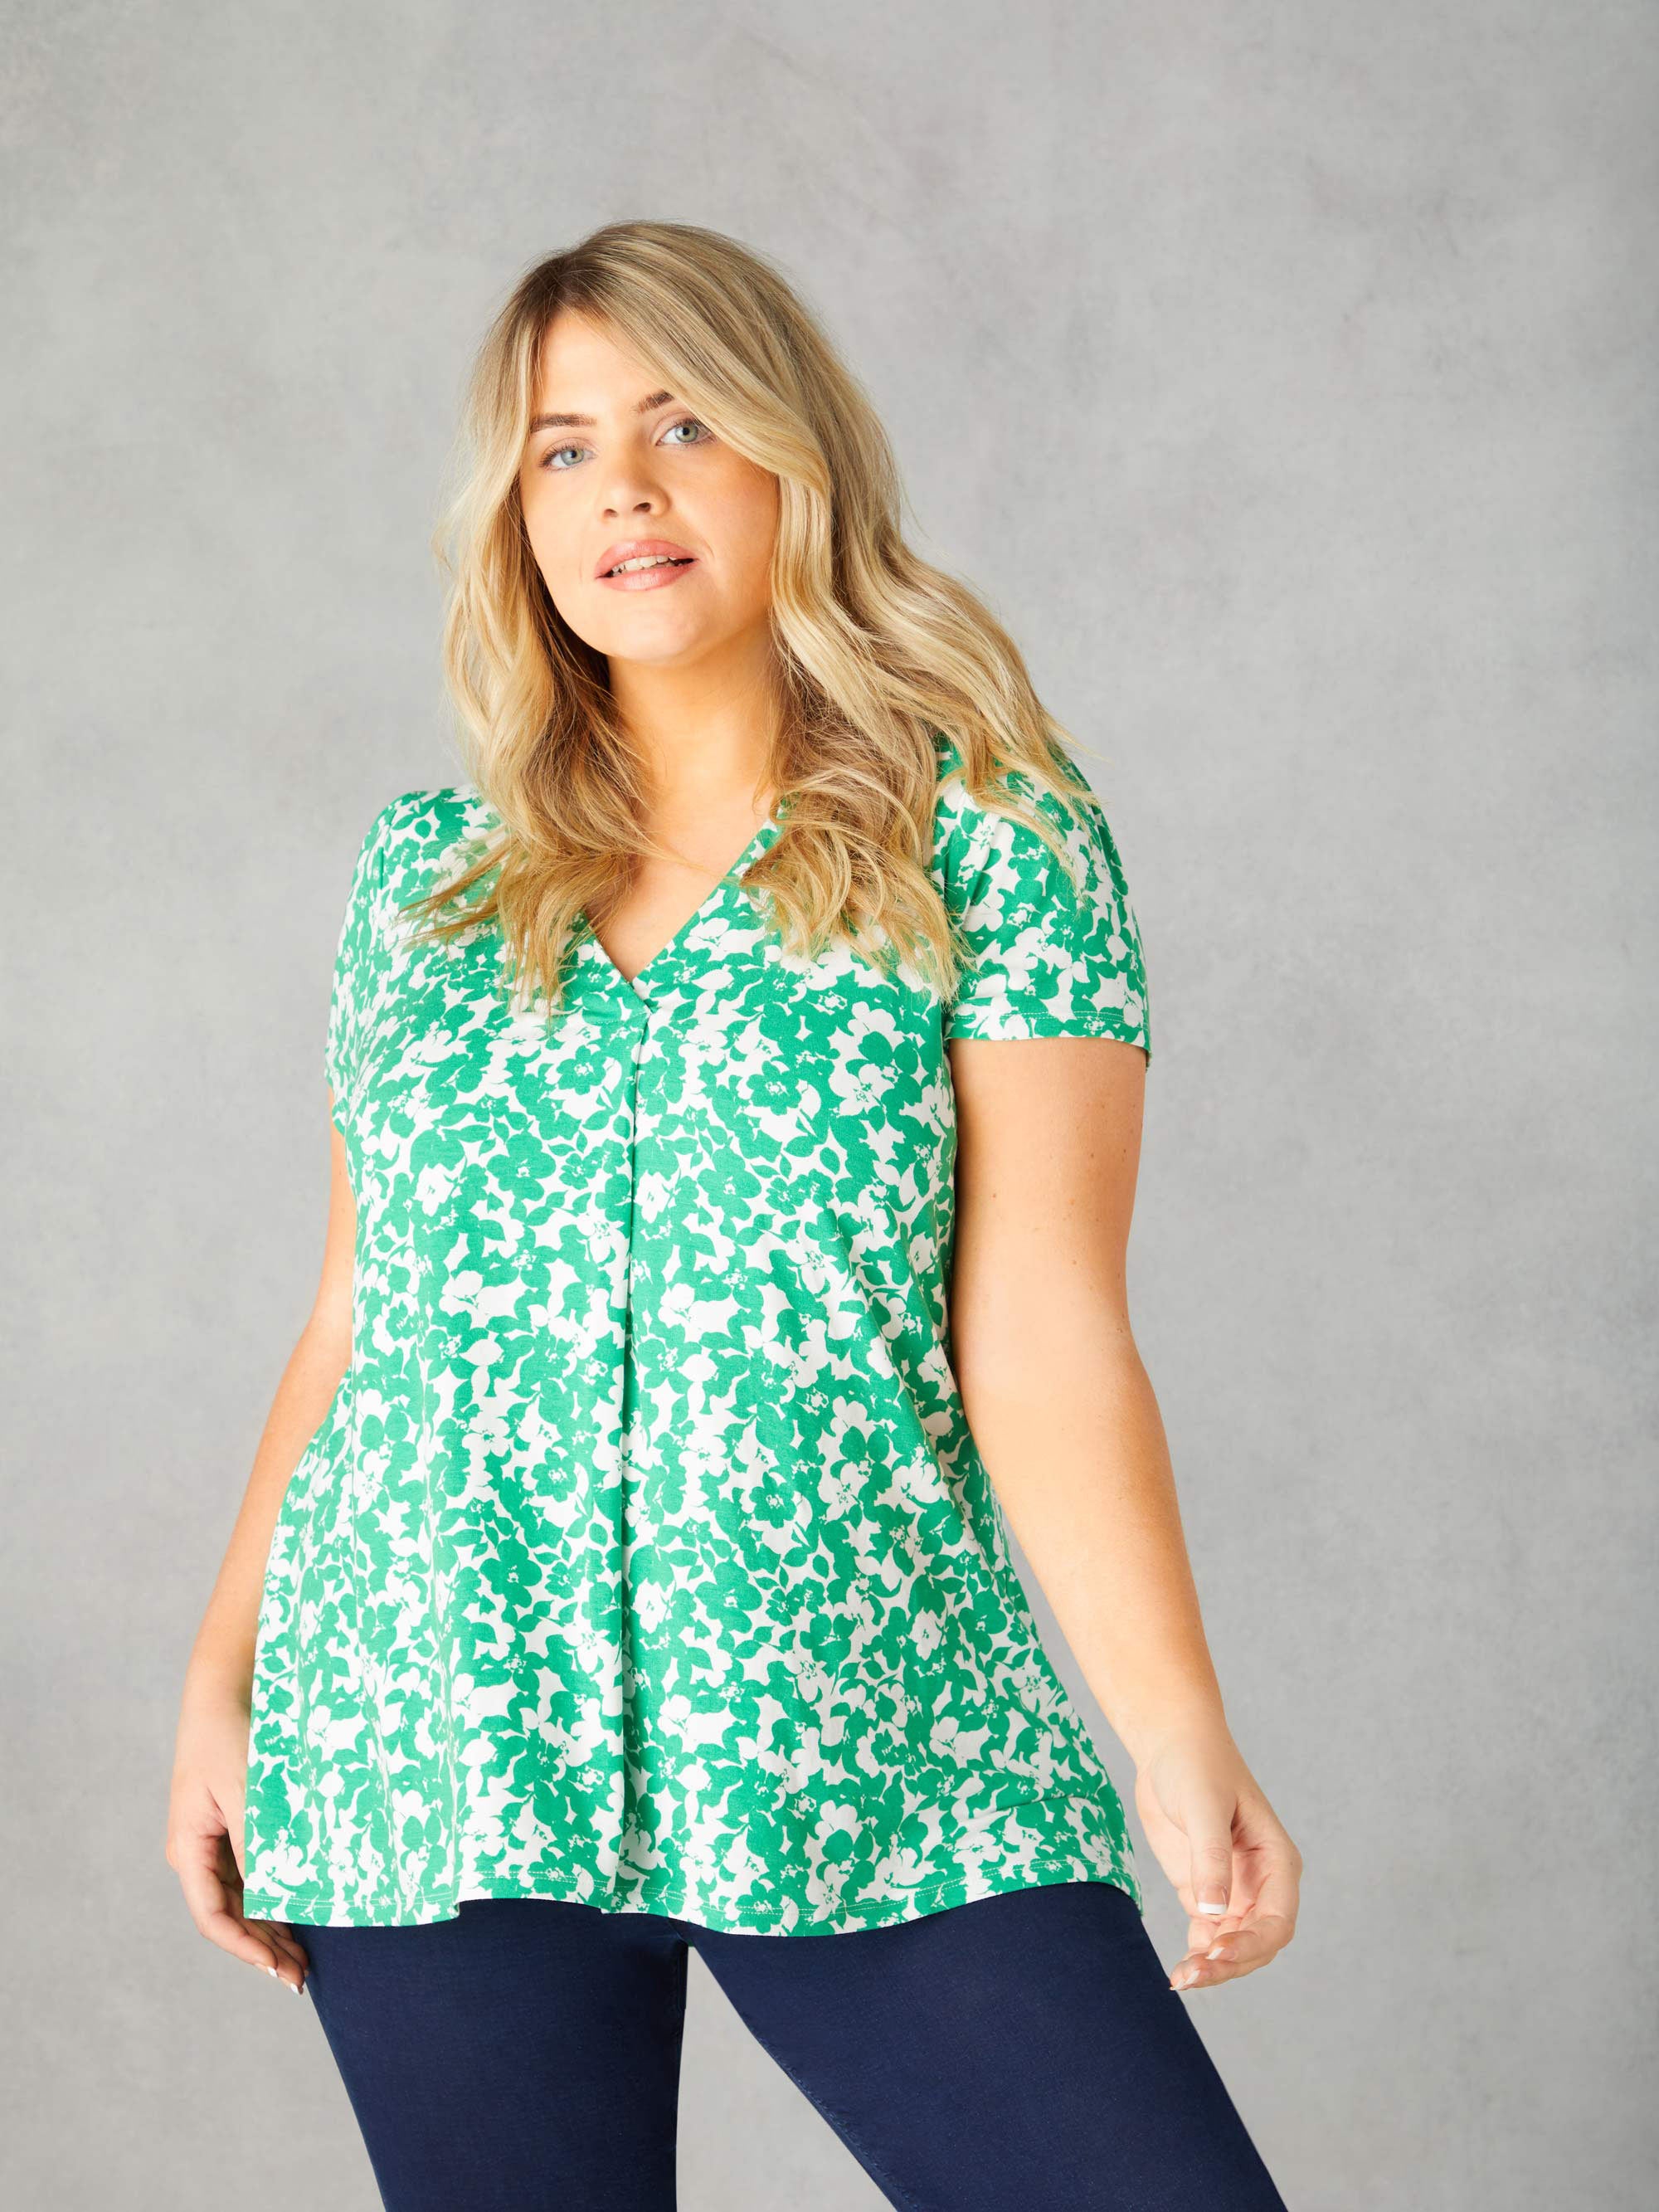 Green Floral Print Jersey Pleat Front Top